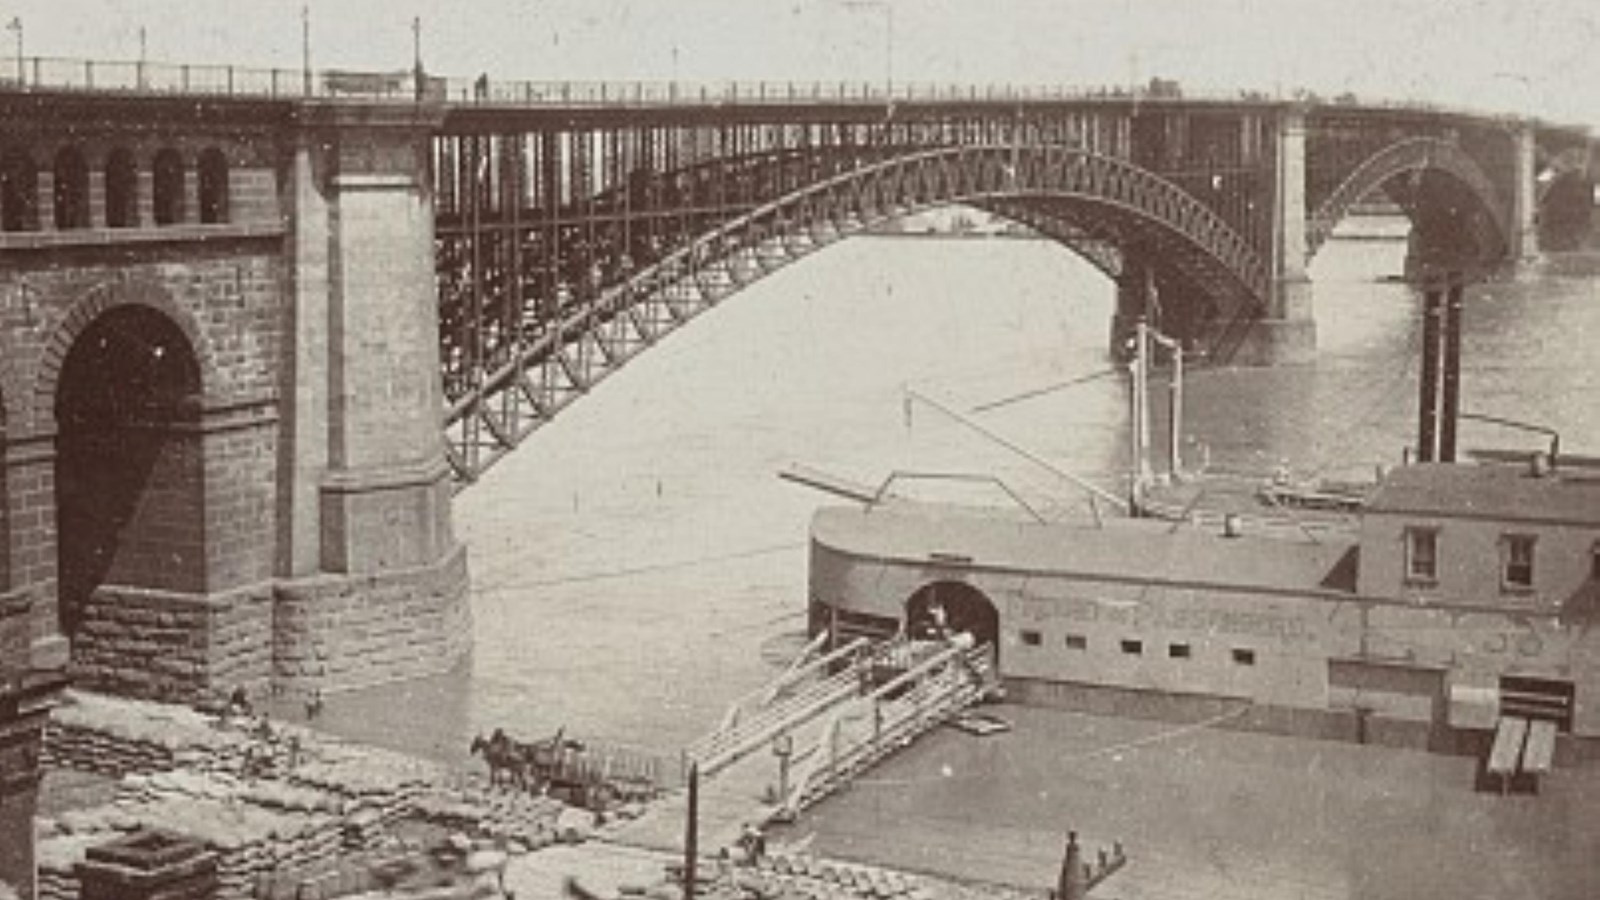 and old black and white photo of the Eads bridge with a boat and materials to be loaded stacked